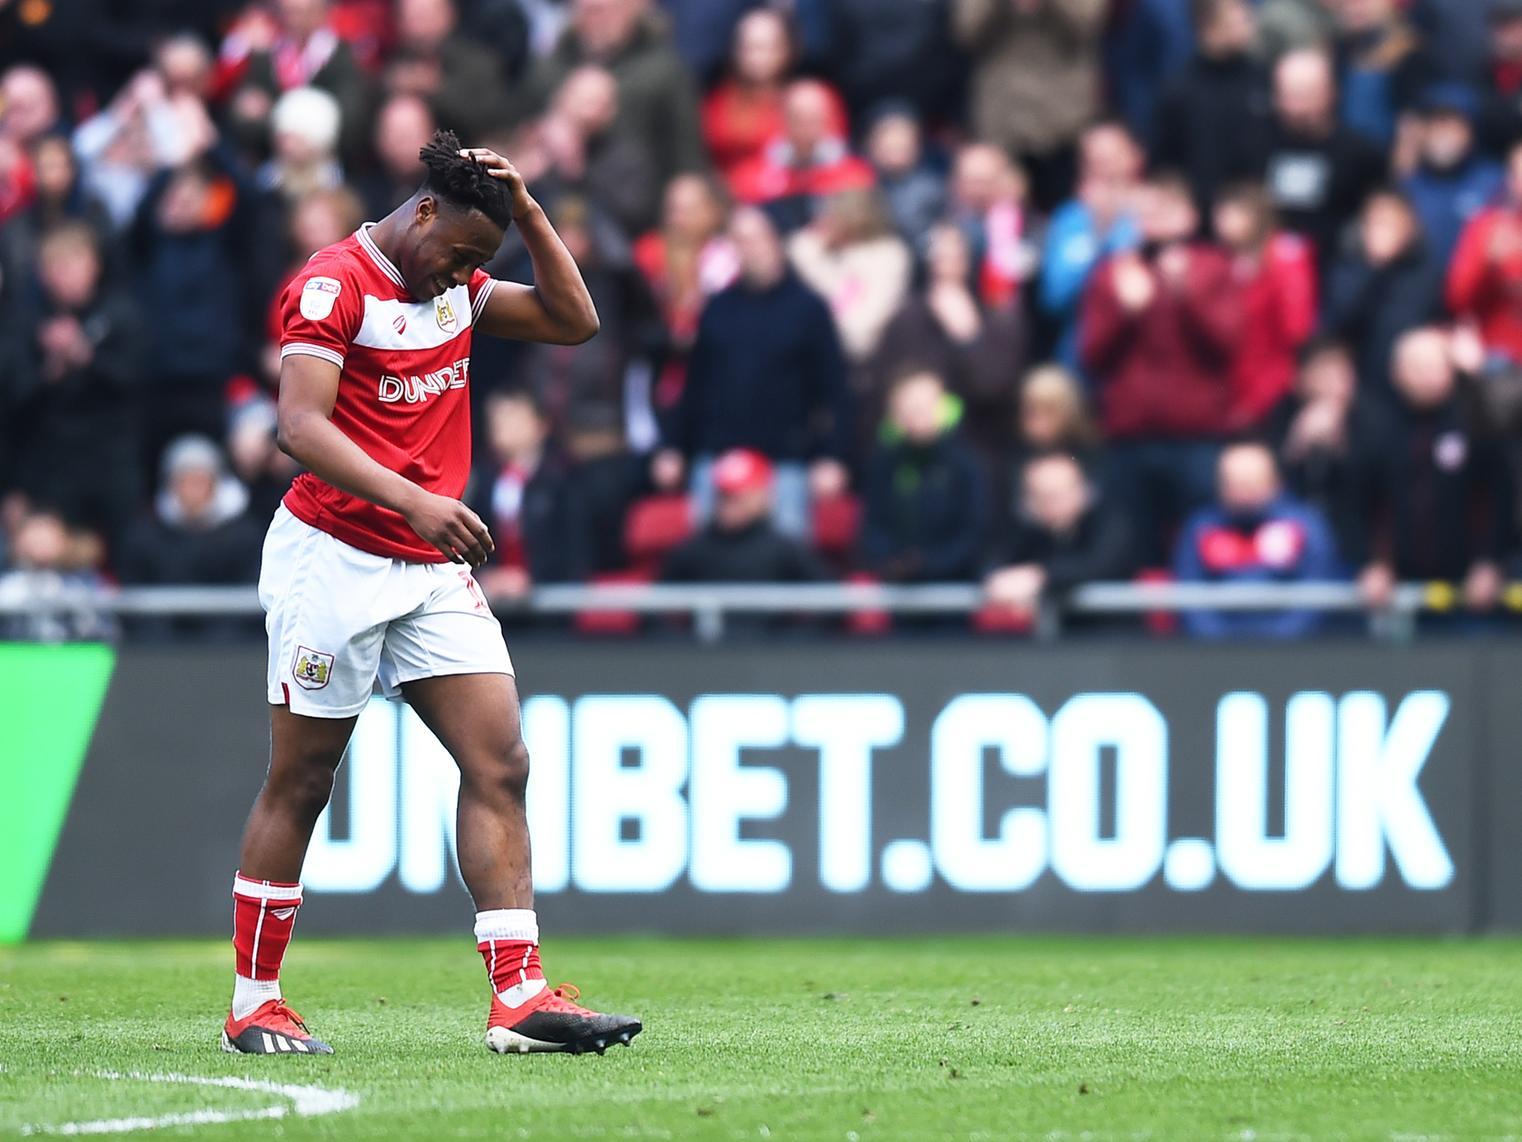 Bristol City striker Antoine Semenyo looks set to be the subject of a tug-of-war between Sunderland and Doncaster Rovers, who are both said to be keen on bringing 20-year-old in on loan. (Bristol Post)